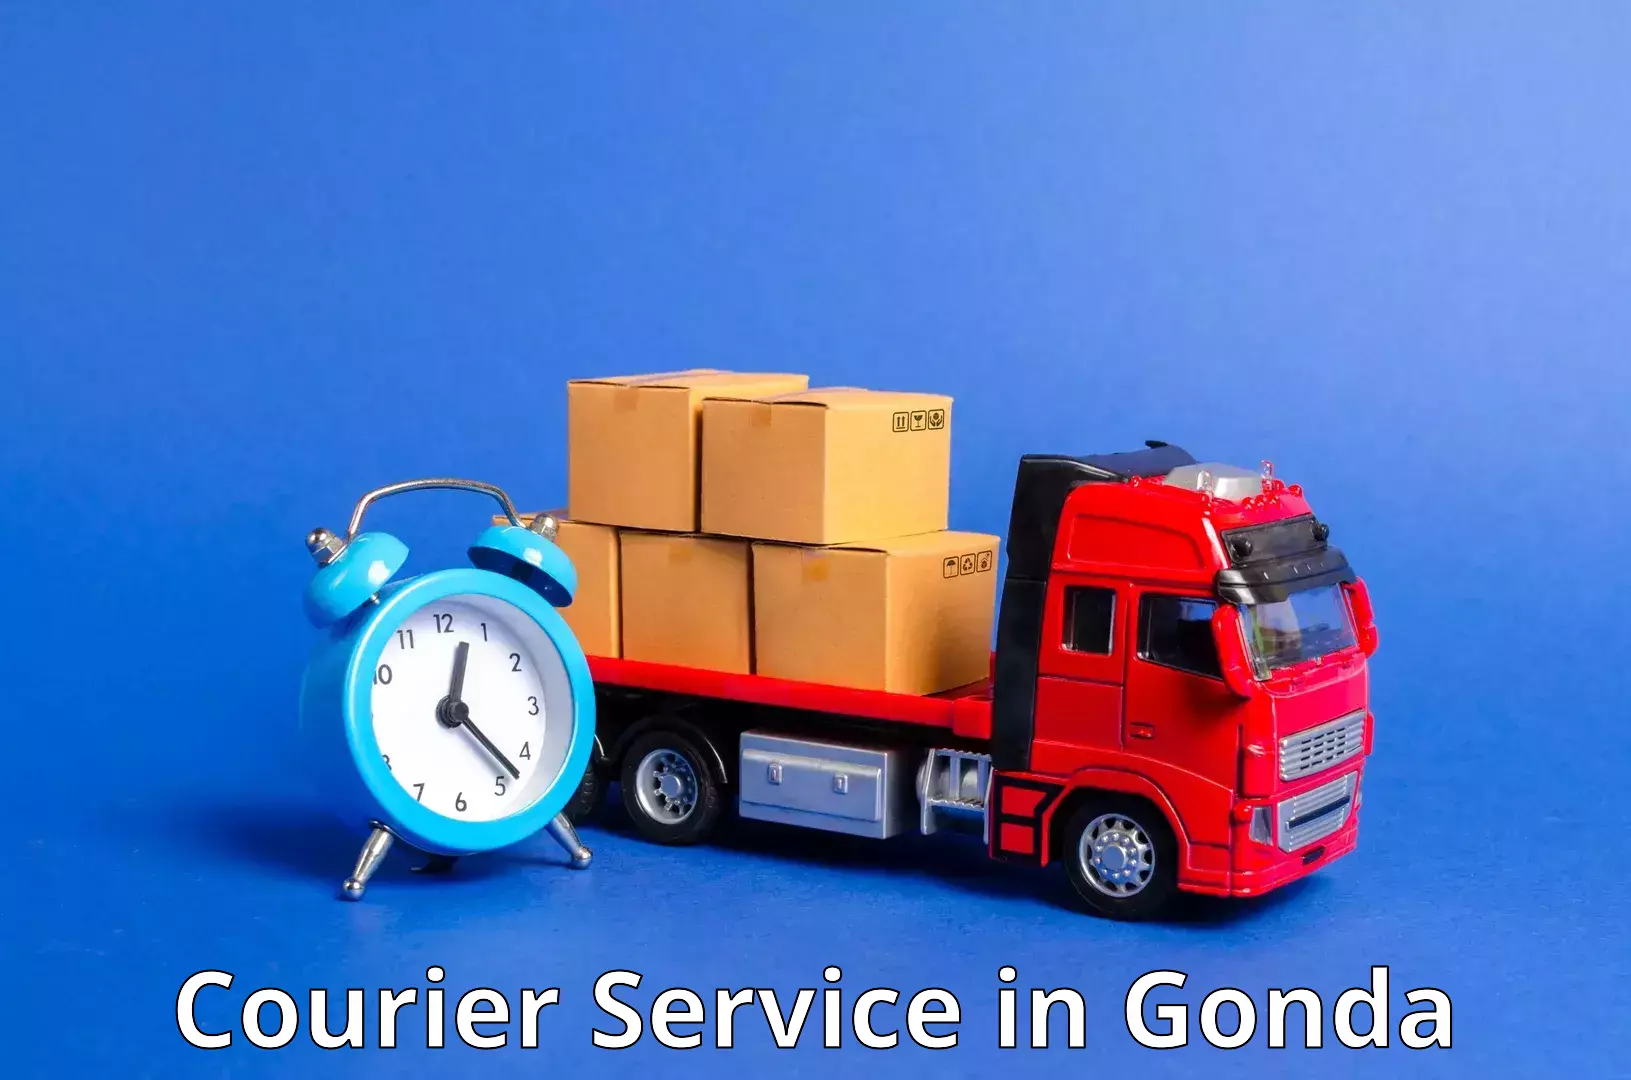 On-demand shipping options in Gonda